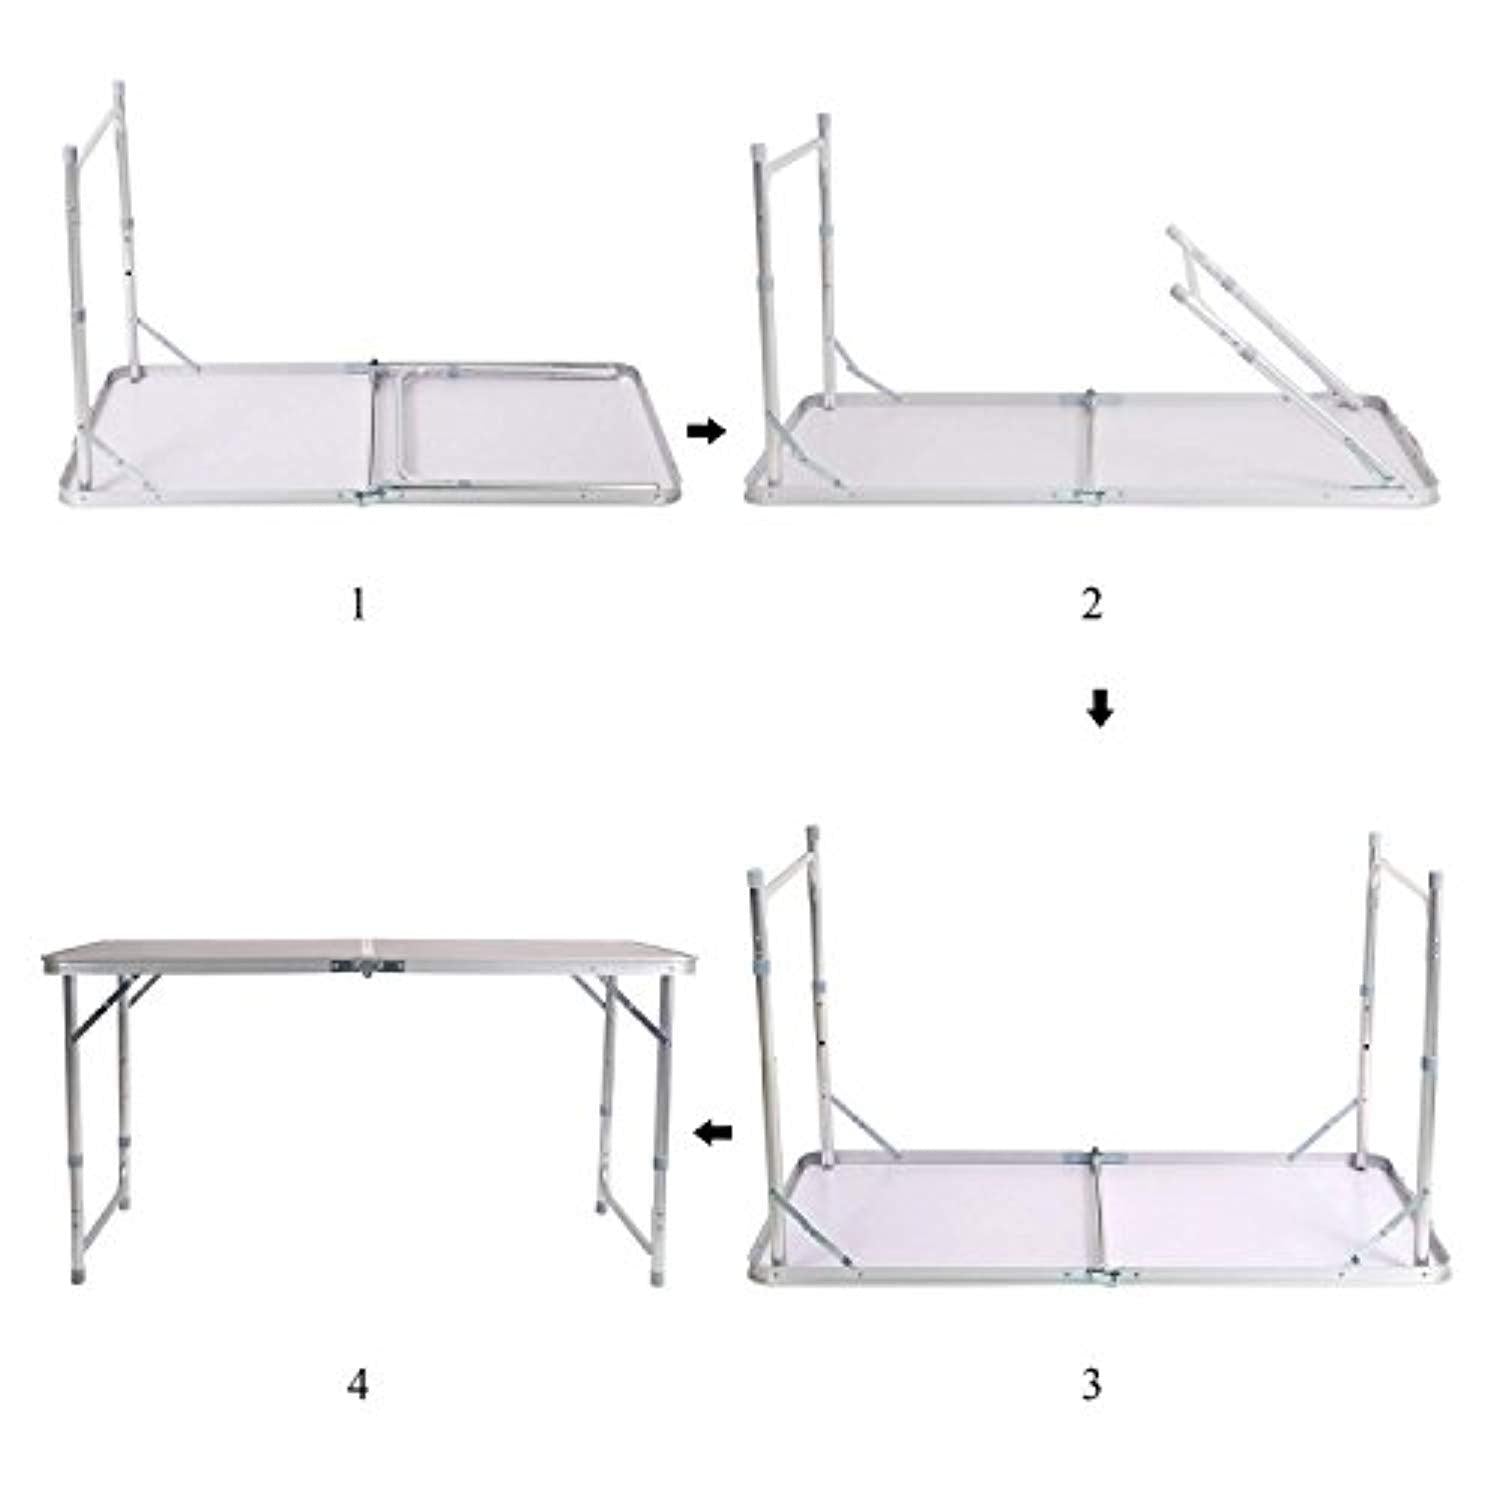 Bosonshop Portable Folding Outdoor Picnic Table, 4 Seats, Adjustable Camping Suitcase Table Set